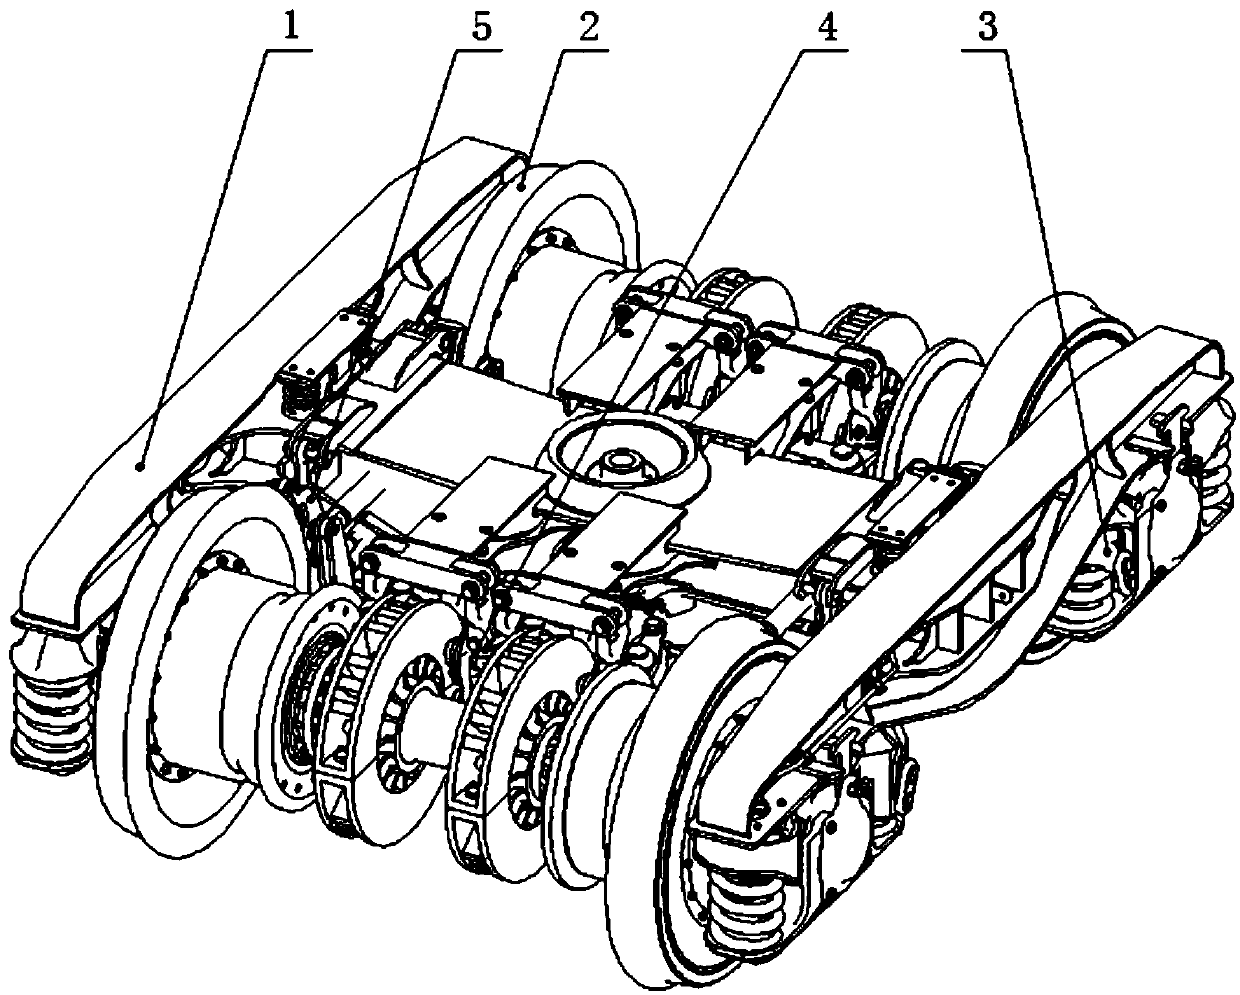 A variable-gauge bogie equipped with an adjustable unit braking device